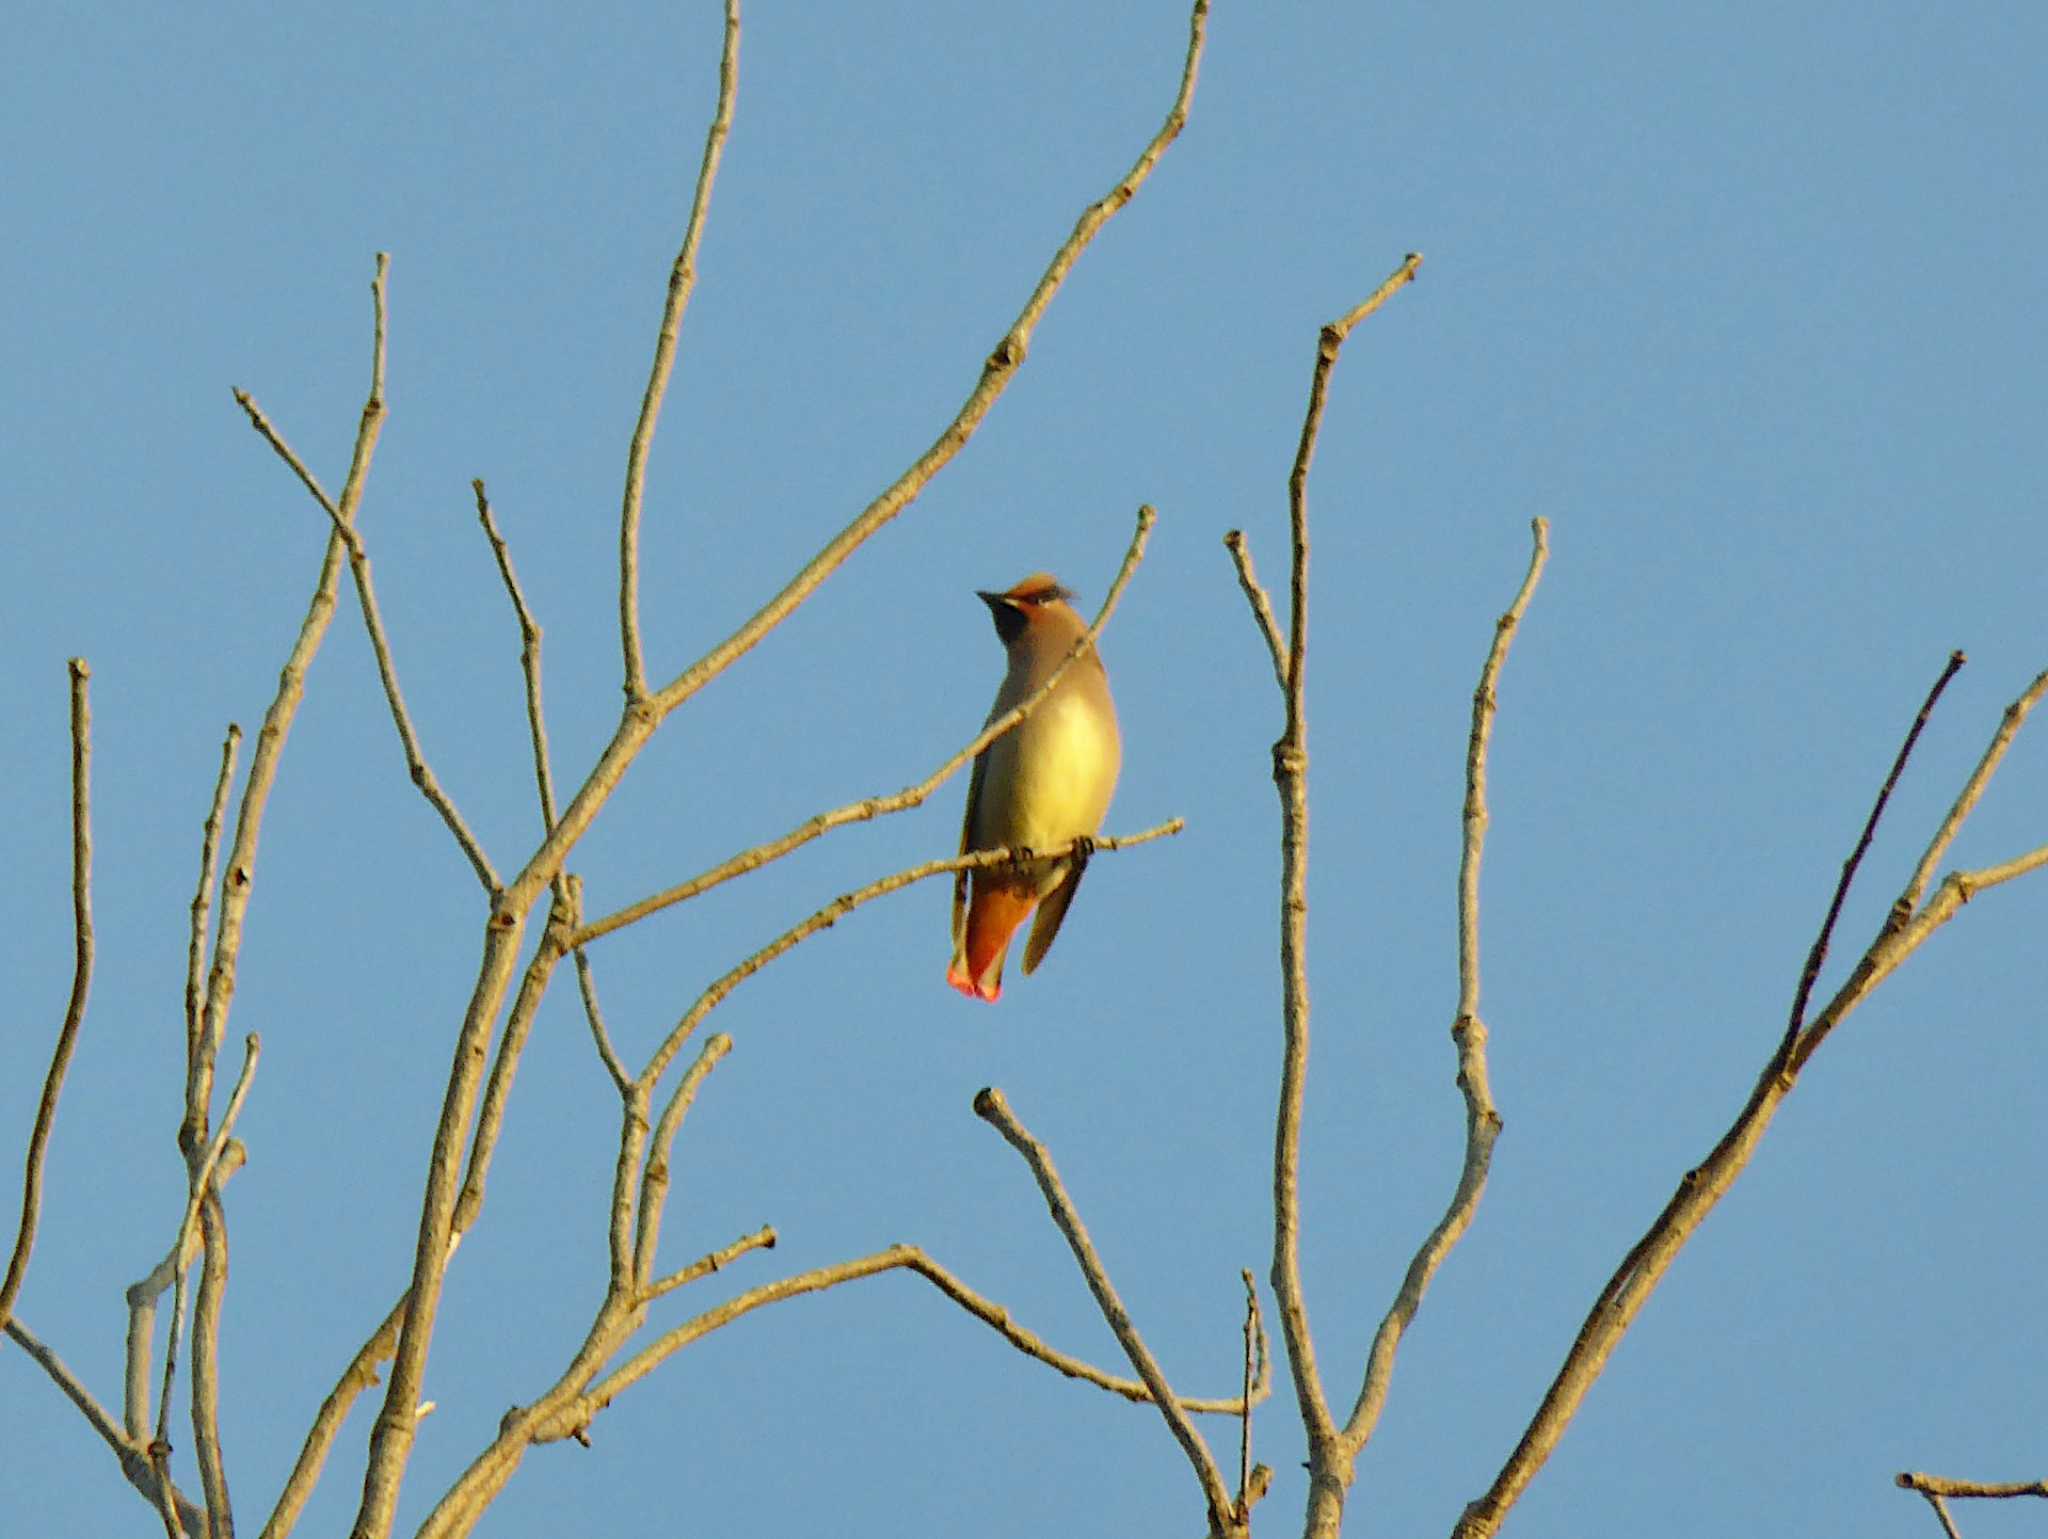 Photo of Japanese Waxwing at 大阪府民の森むろいけ園地 by Toshihiro Yamaguchi